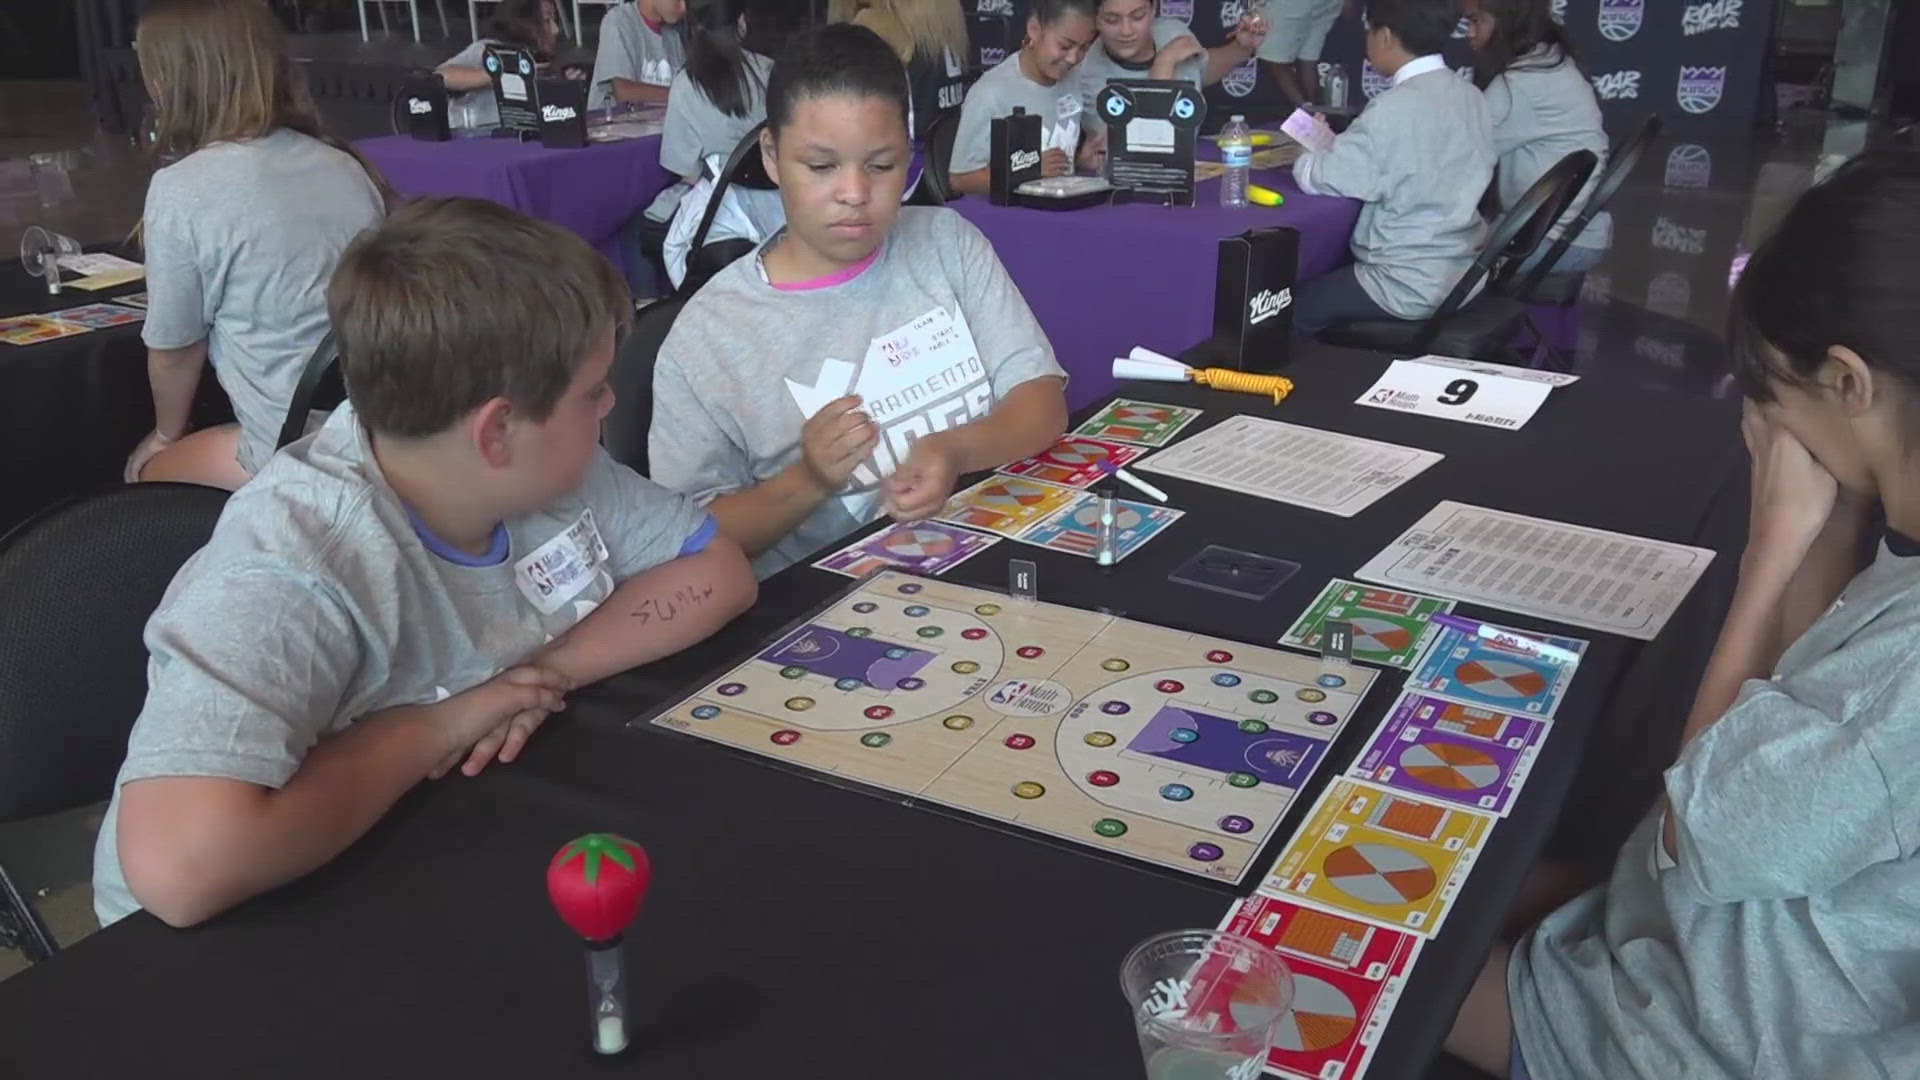 The Sacramento Kings hosted the Math Hoops regional tournament, where a hundred students and their families were treated to education competition.